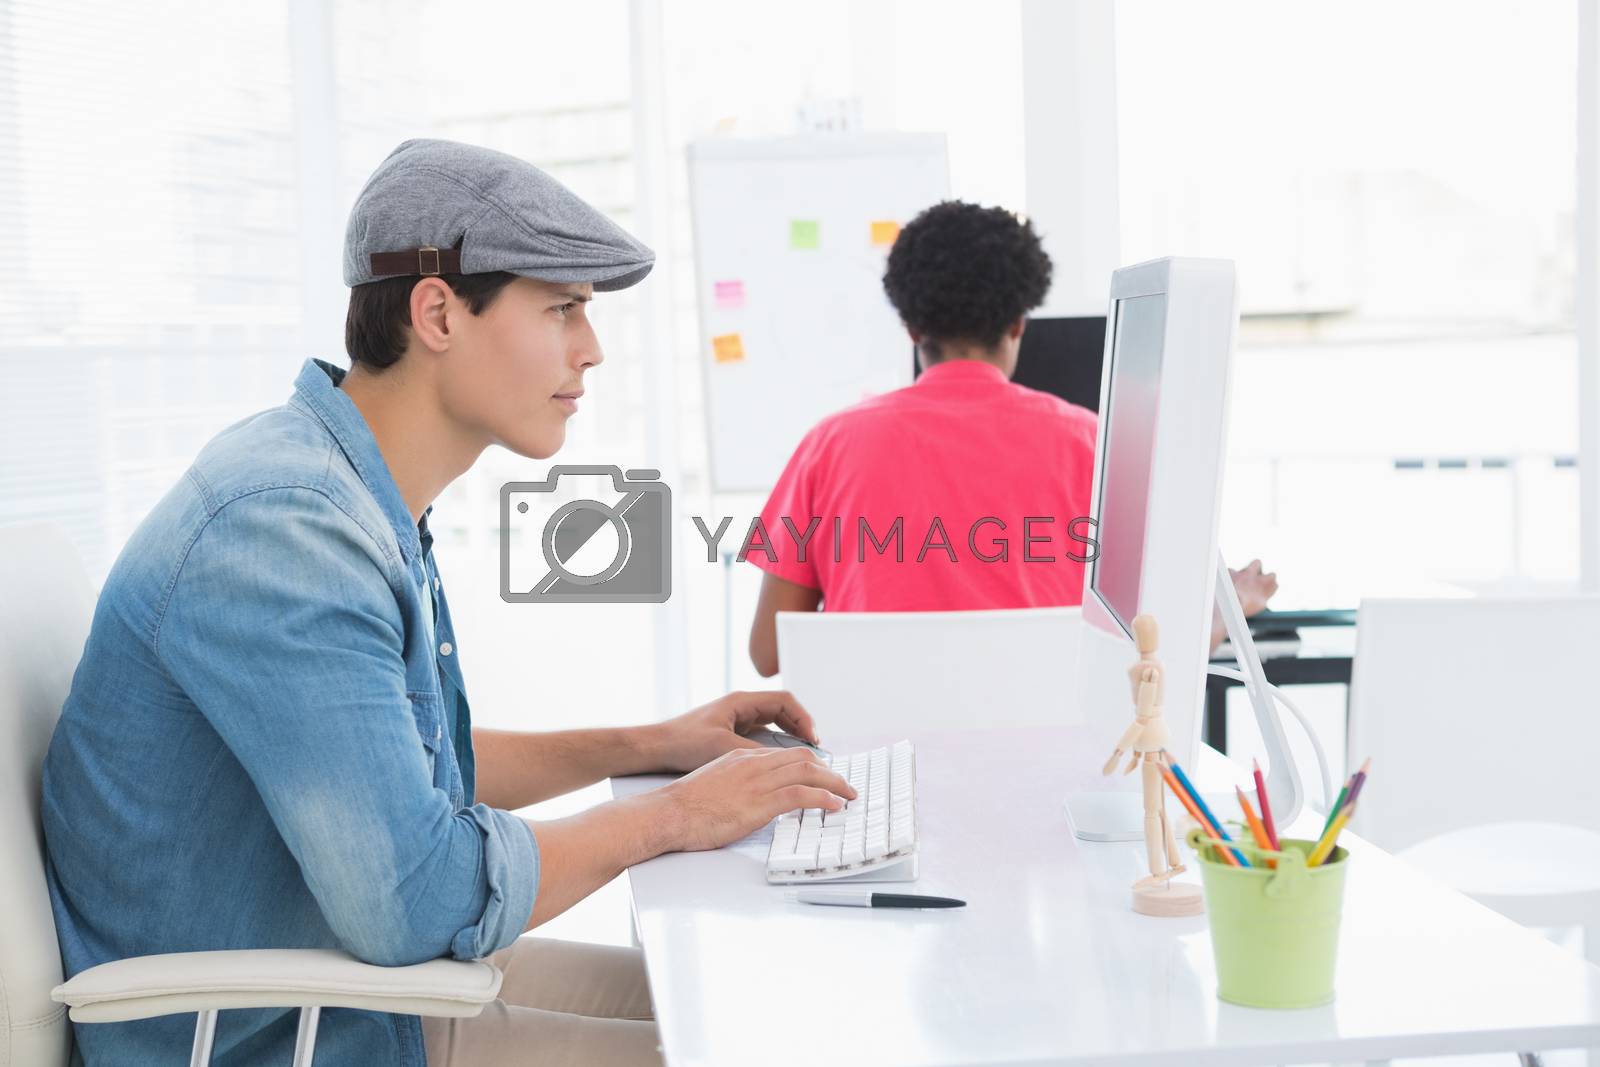 Royalty free image of Young creative man working at desk by Wavebreakmedia